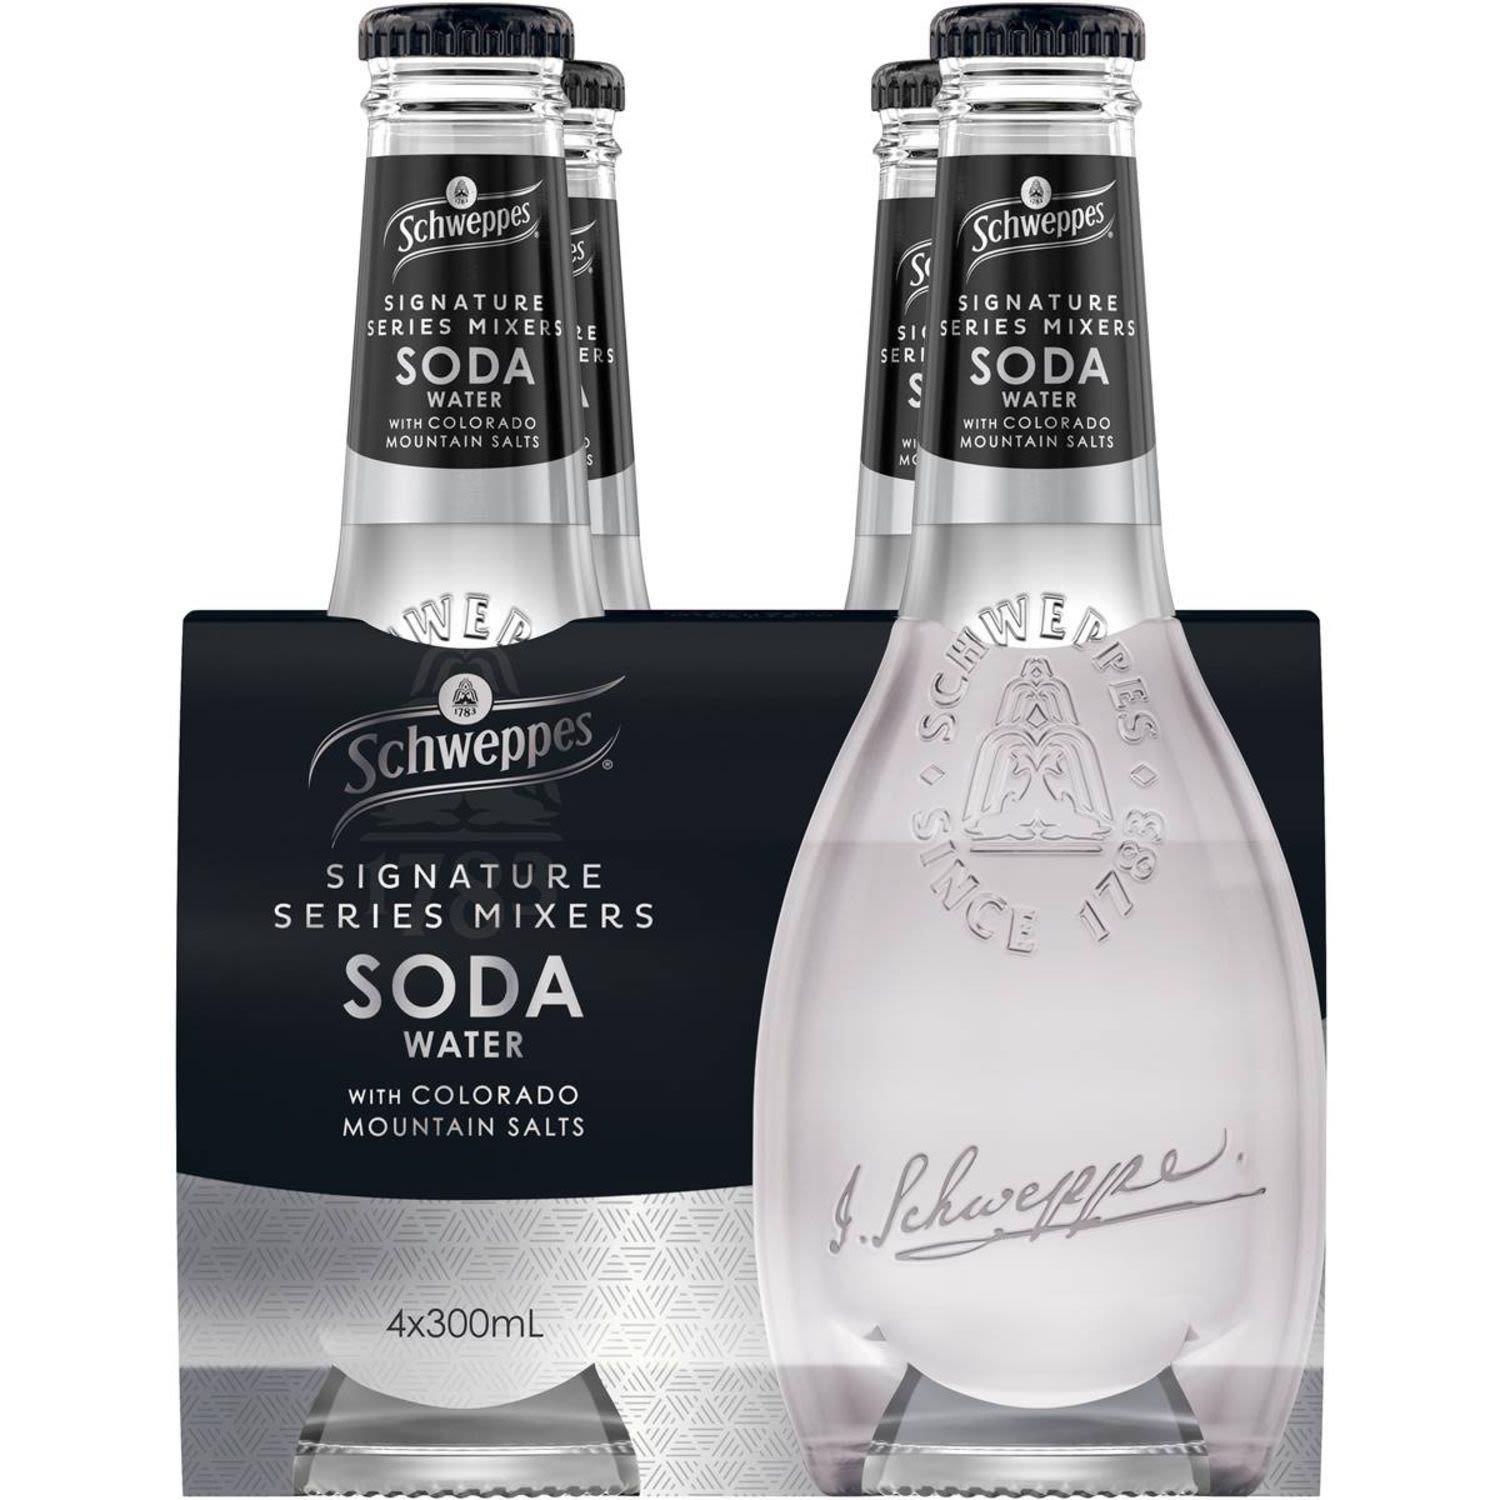 Schweppes Signature Series Mixers Soda Water 300ml, 4 Each